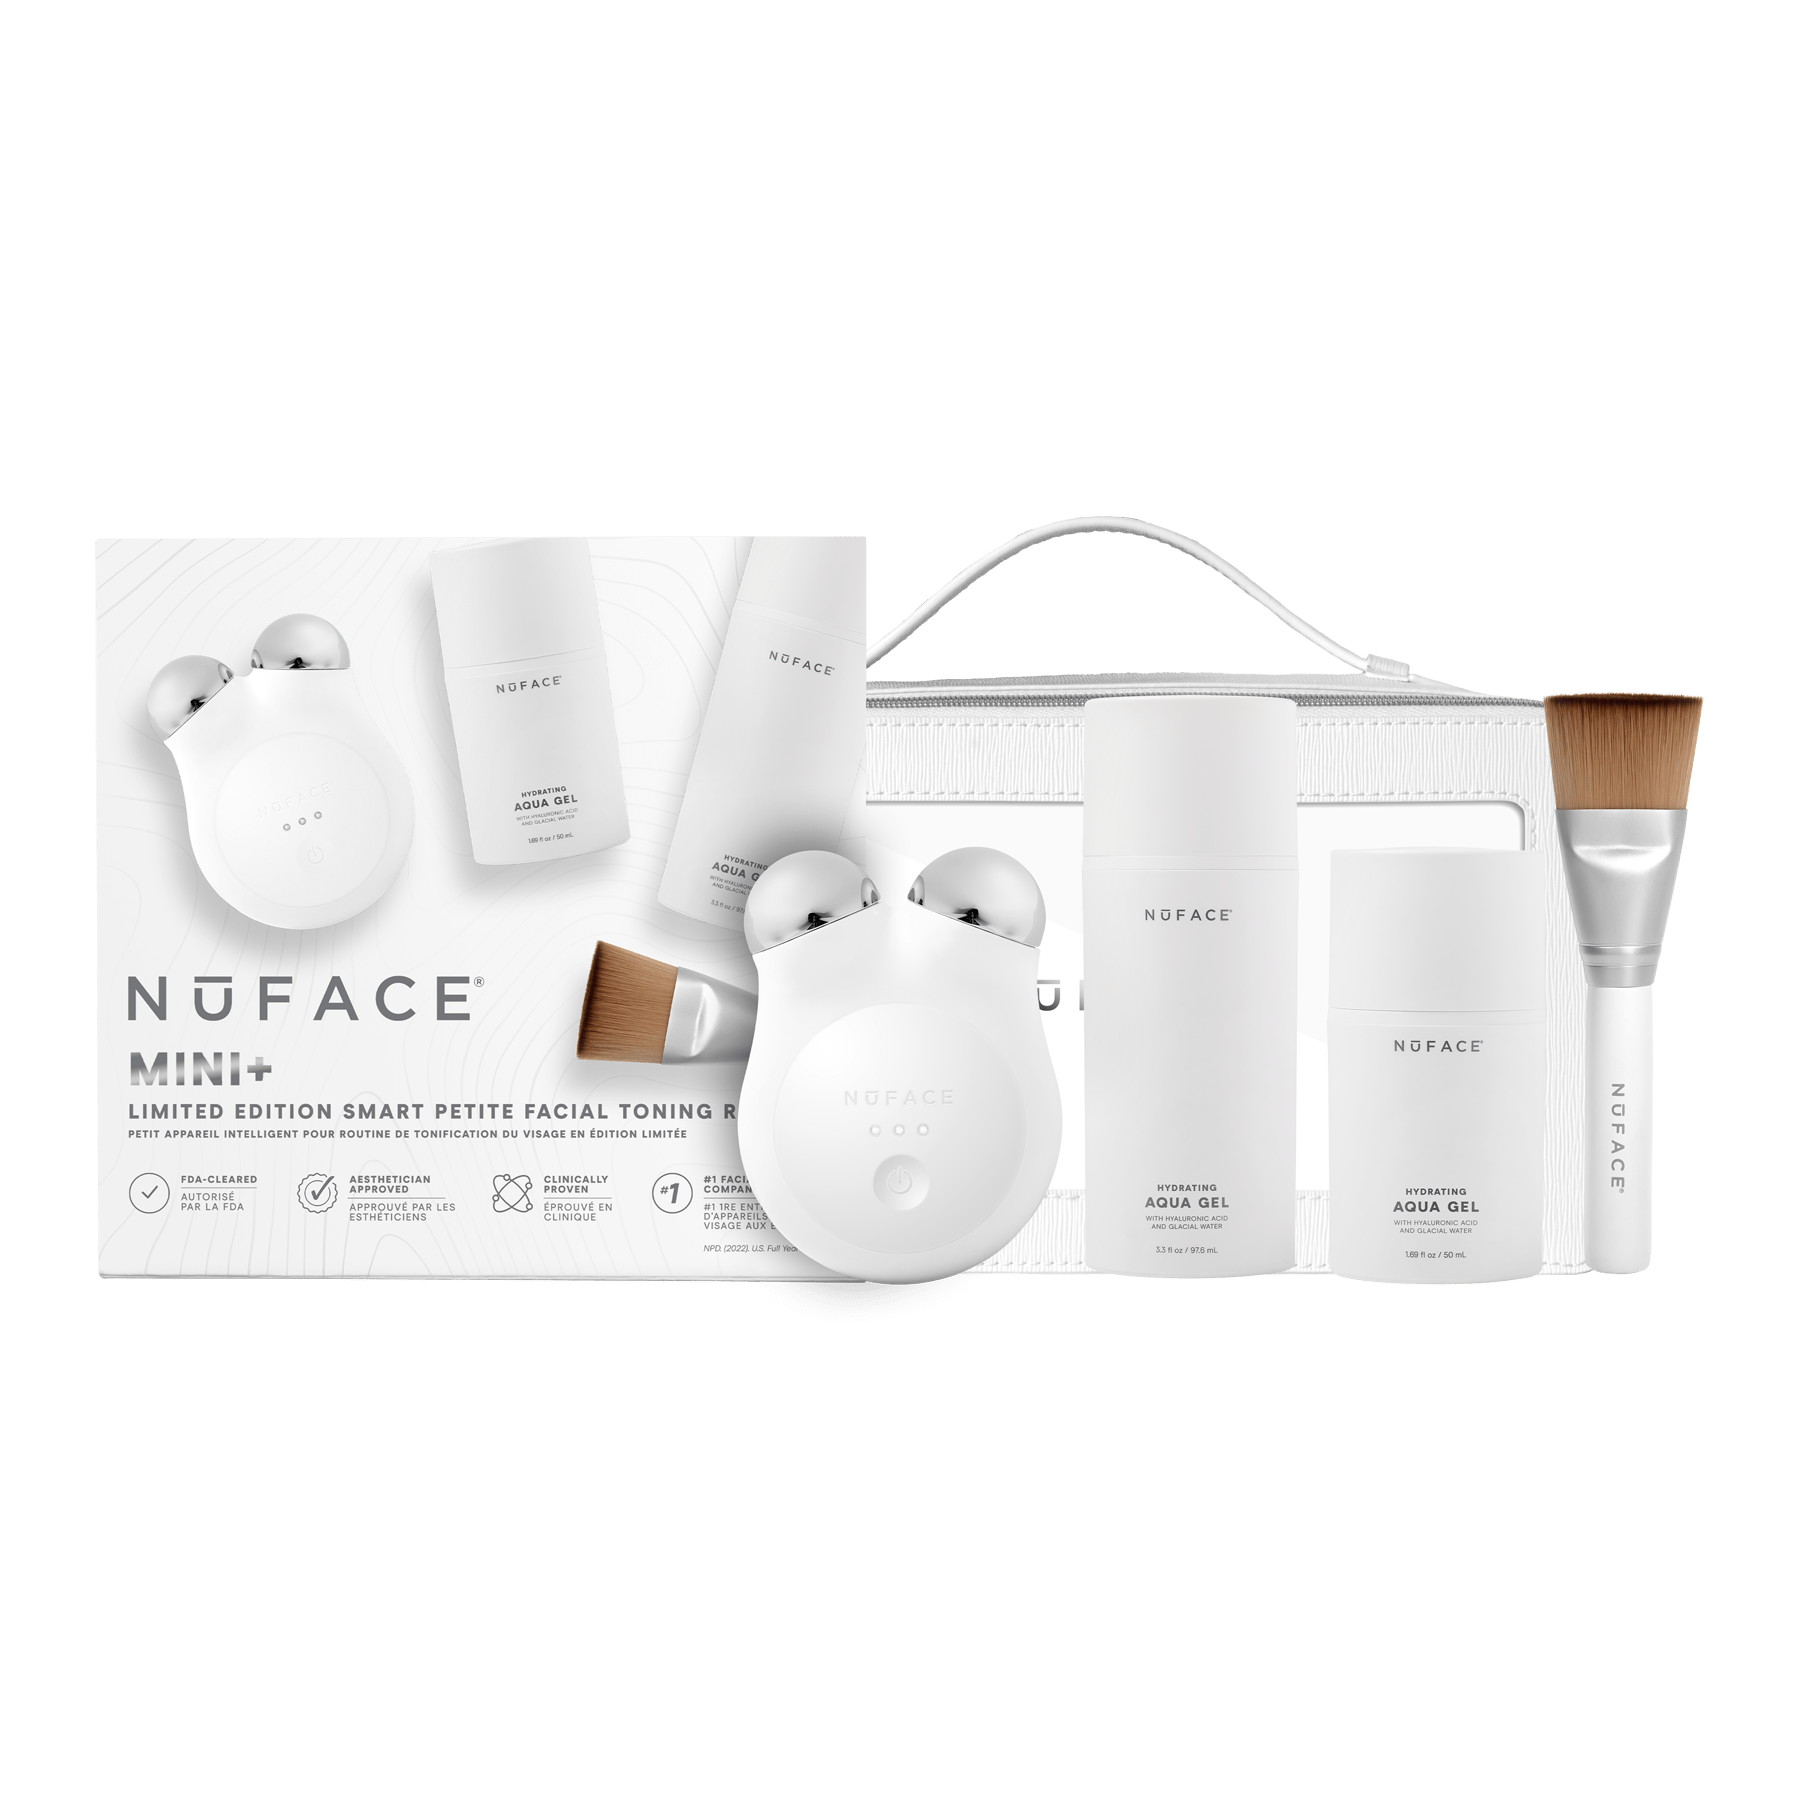 108 Nu Face Products Images, Stock Photos, 3D objects, & Vectors